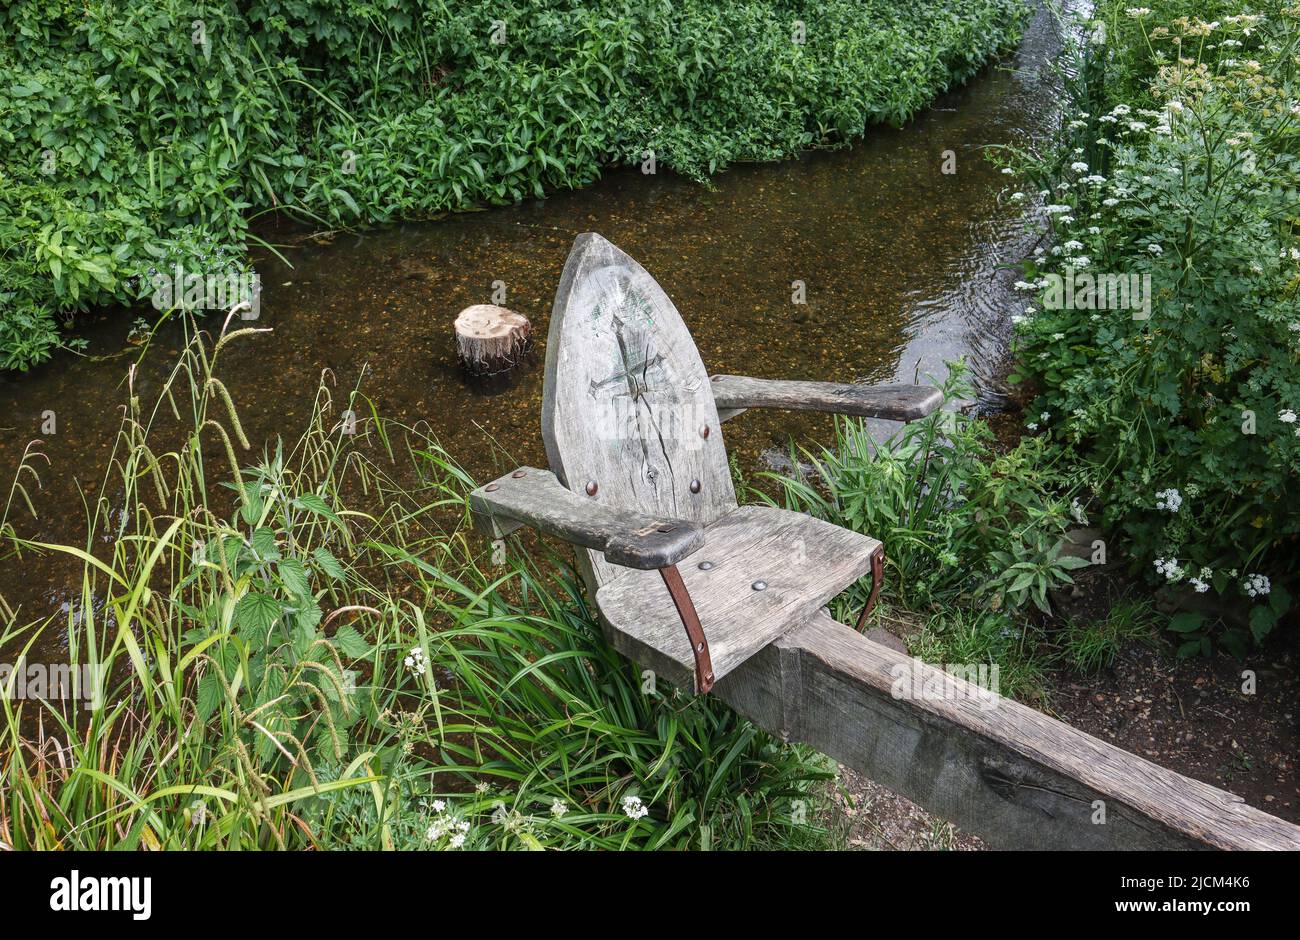 Ducking Stool on the River Avon in Christchurch, Dorset, UK. Stock Photo